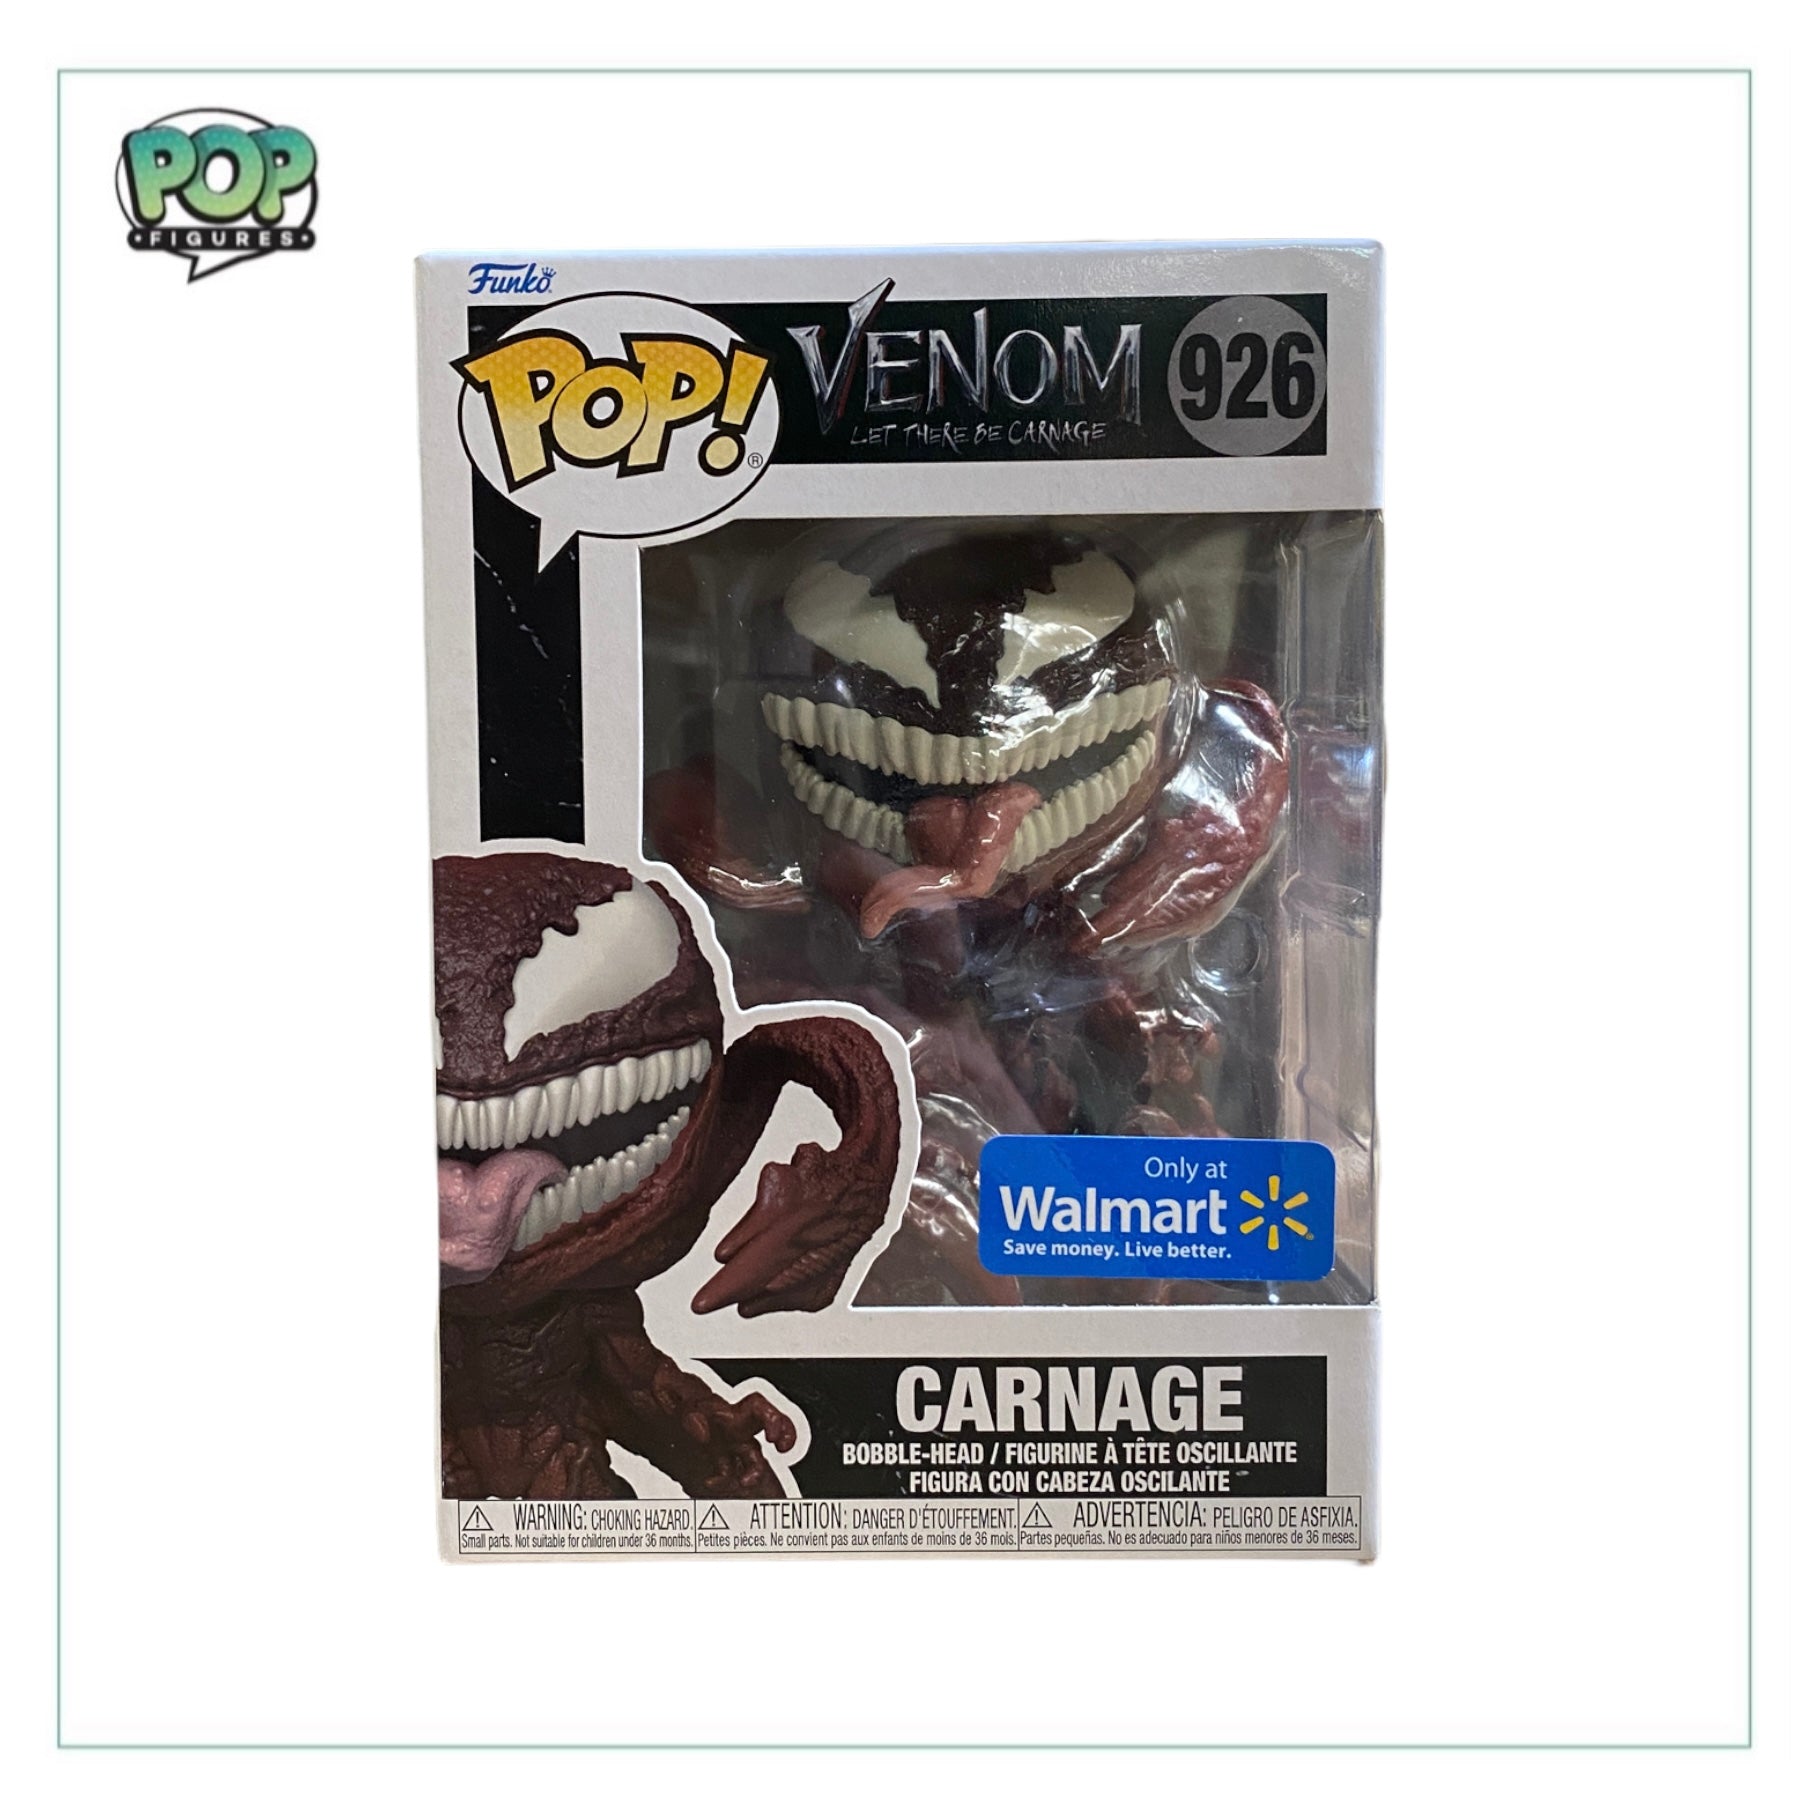 Carnage #926 (w/ Tentacles) Funko Pop! - Venom Let There Be Carnage - Walmart Exclusive